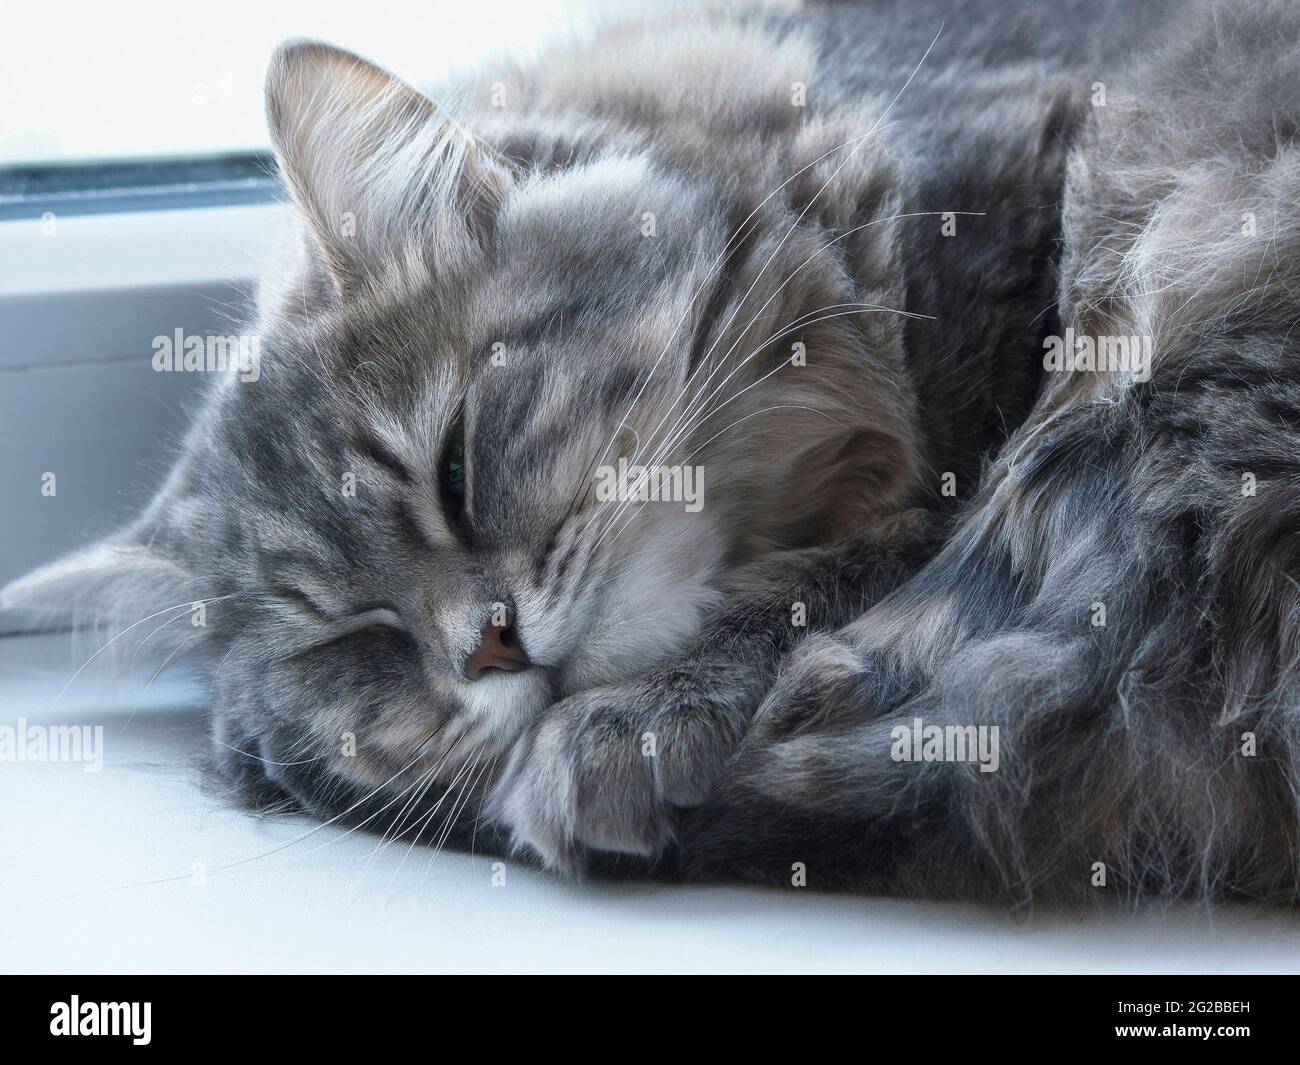 Sleeping cat in funny pose Stock Photo